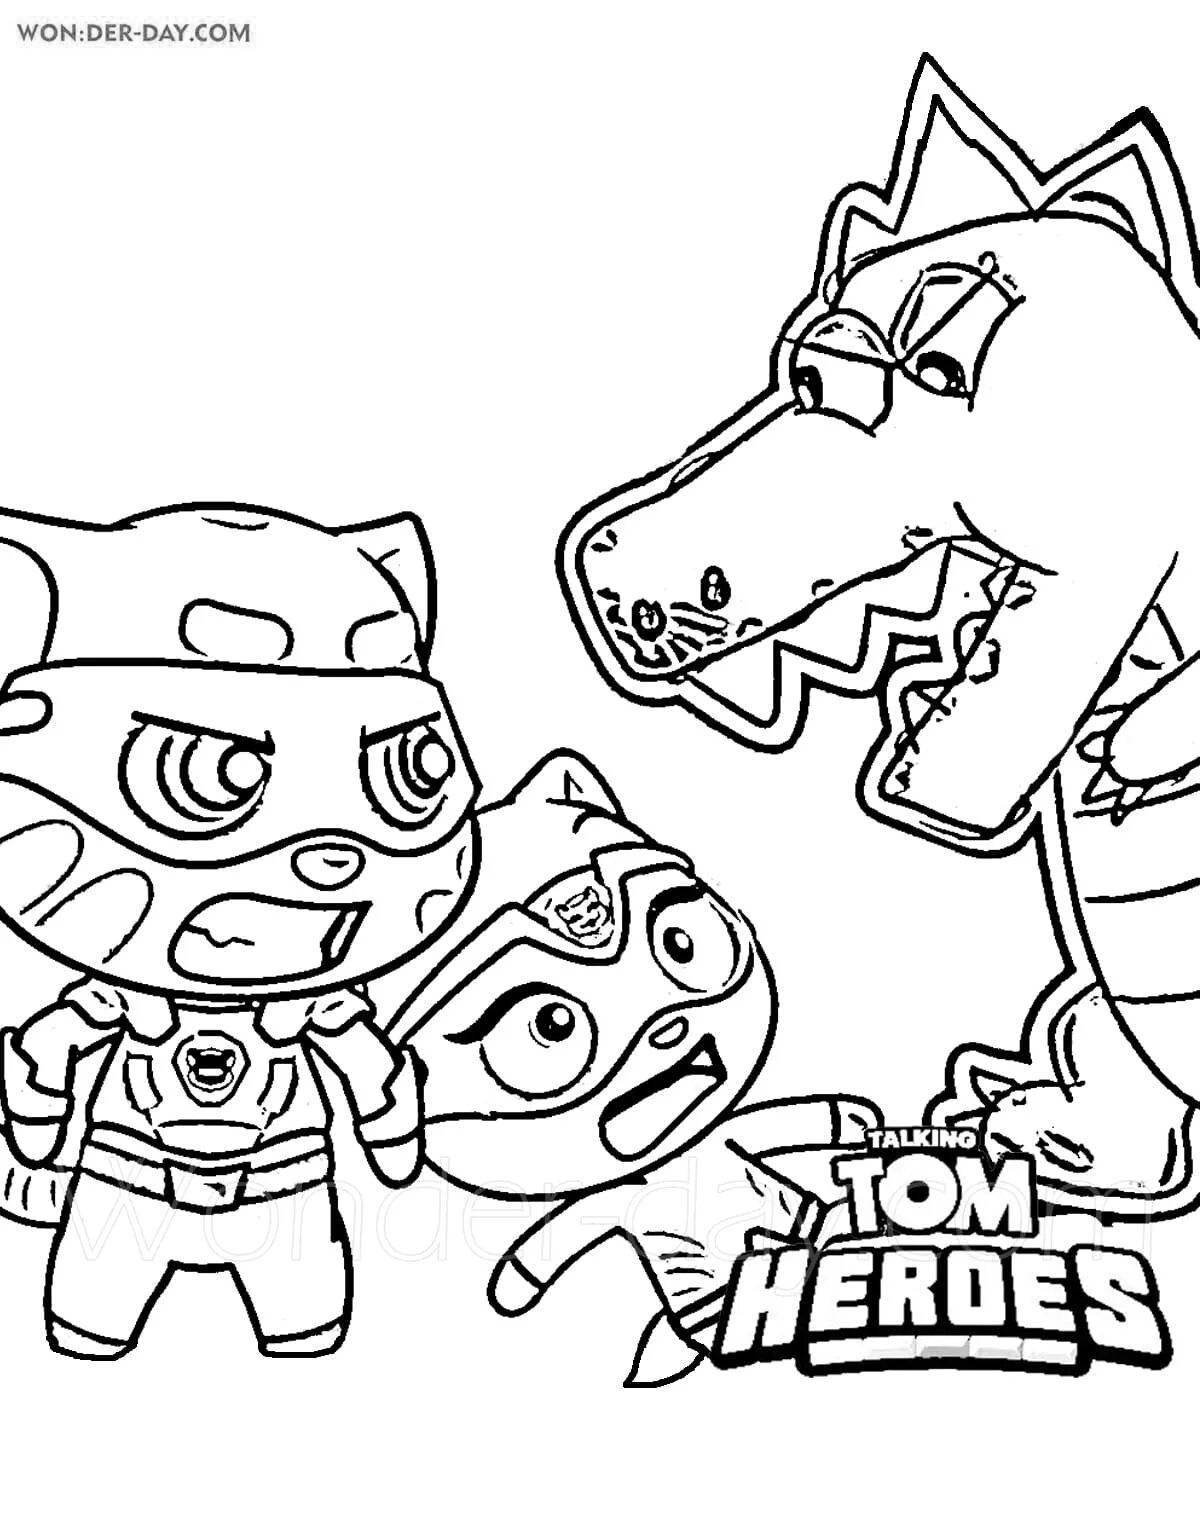 Fun tom and ben coloring pages